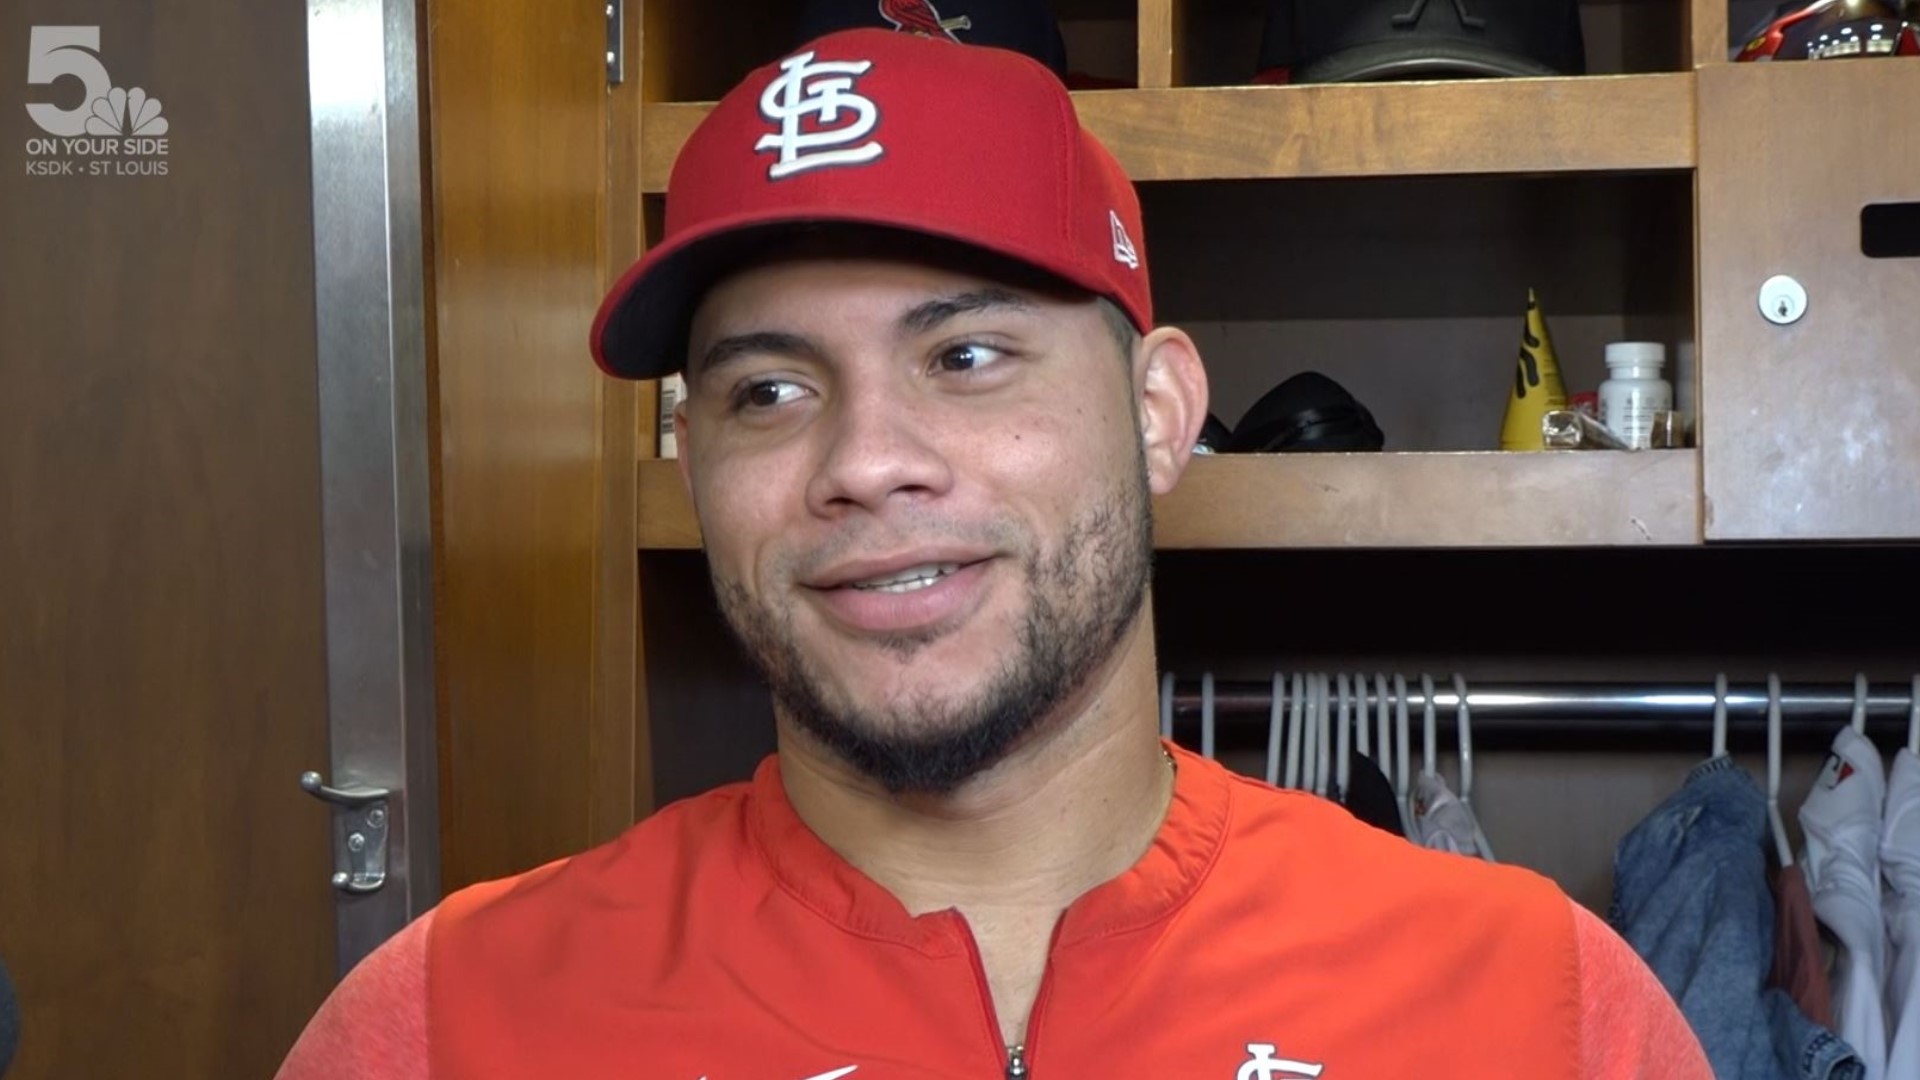 Willson Contreras talks about teammate Adam Wainwright's final weekend with the Cardinals. He talks about the impact he had on him and the team.